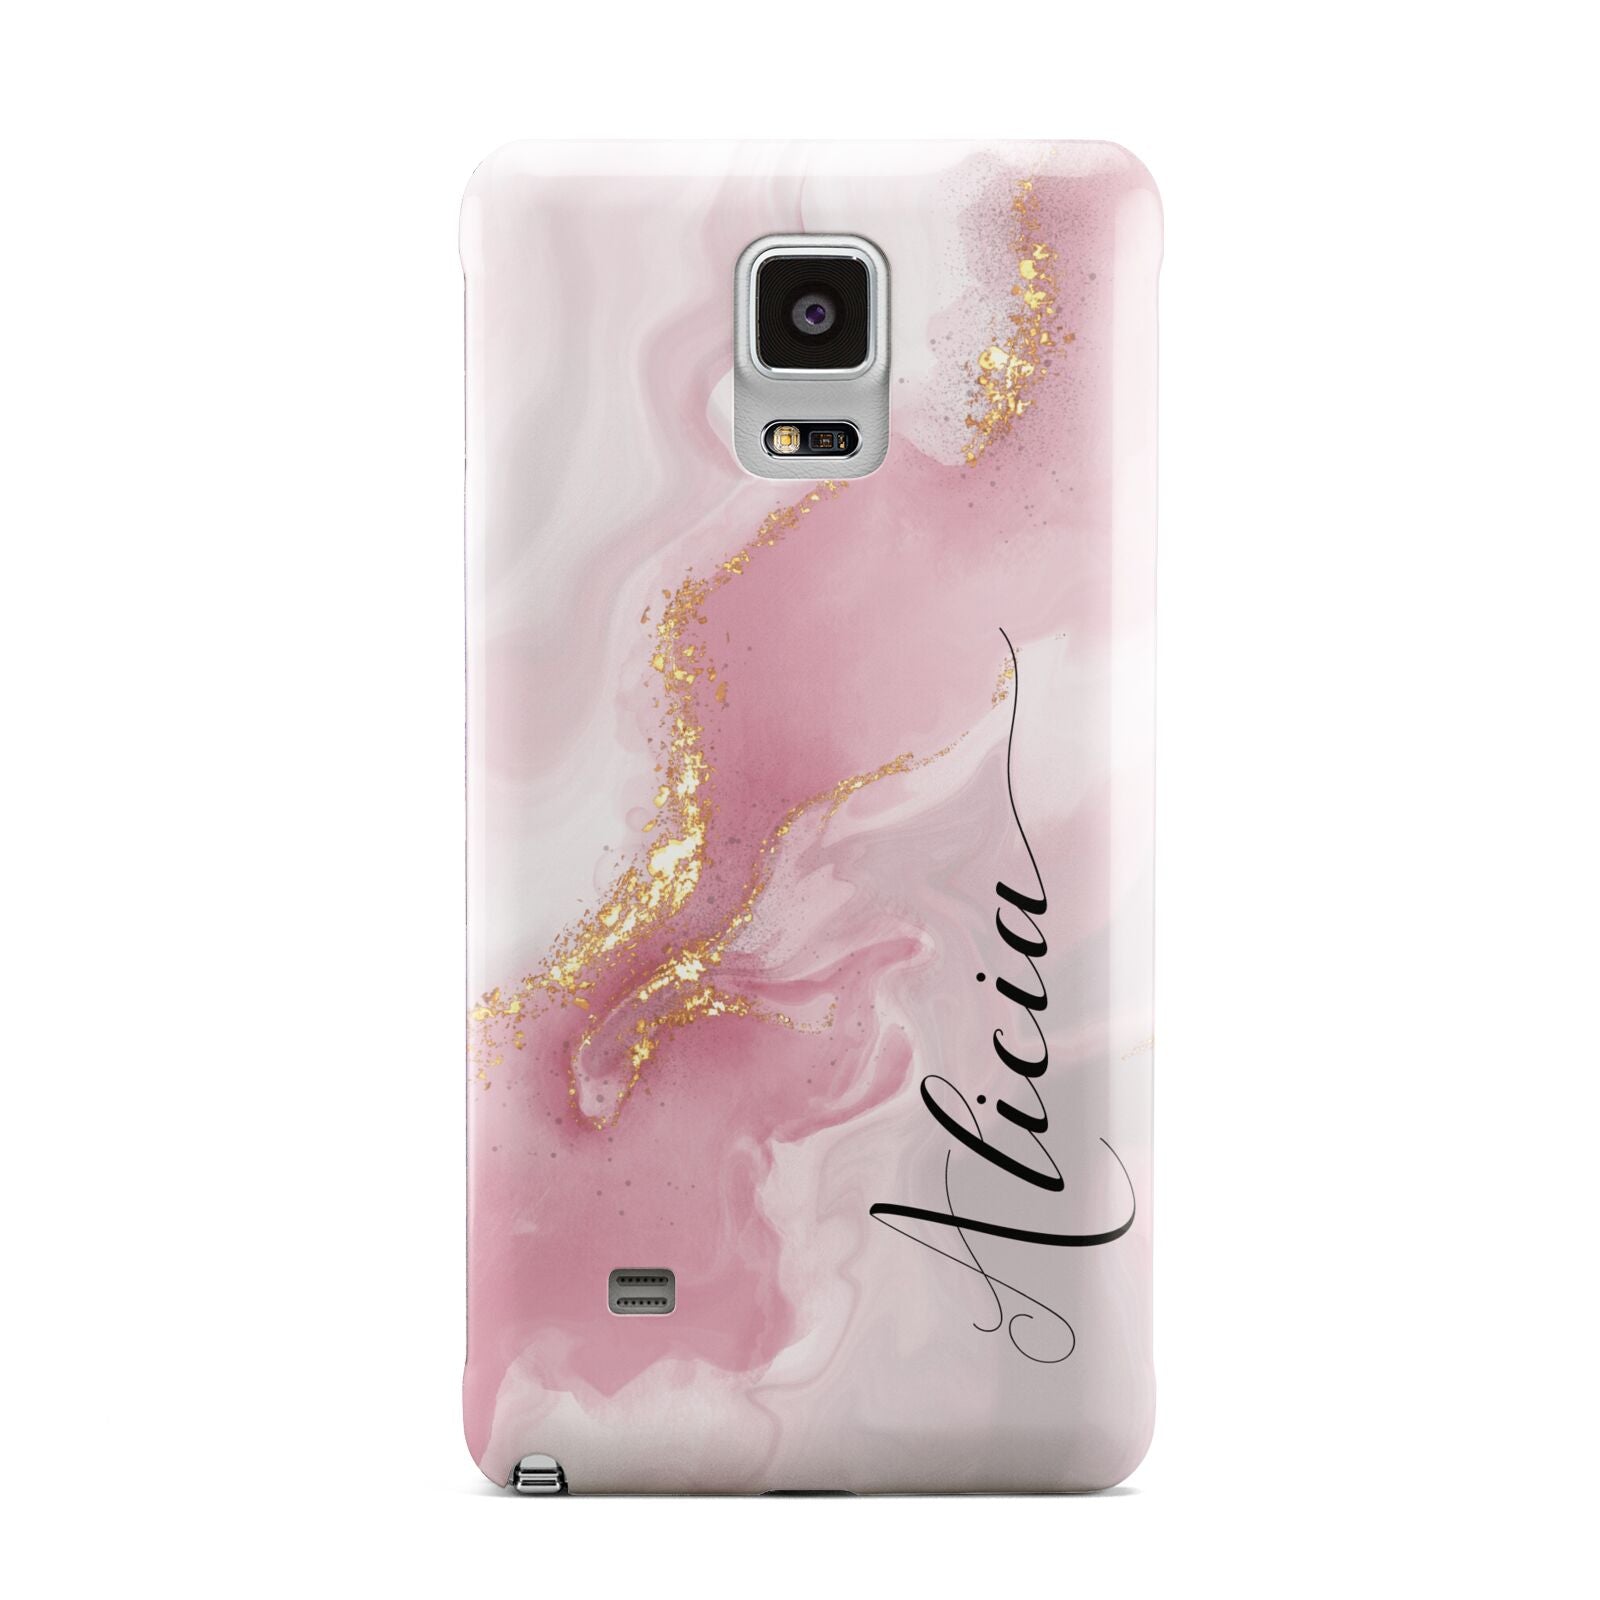 Personalised Pink Marble Samsung Galaxy Note 4 Case